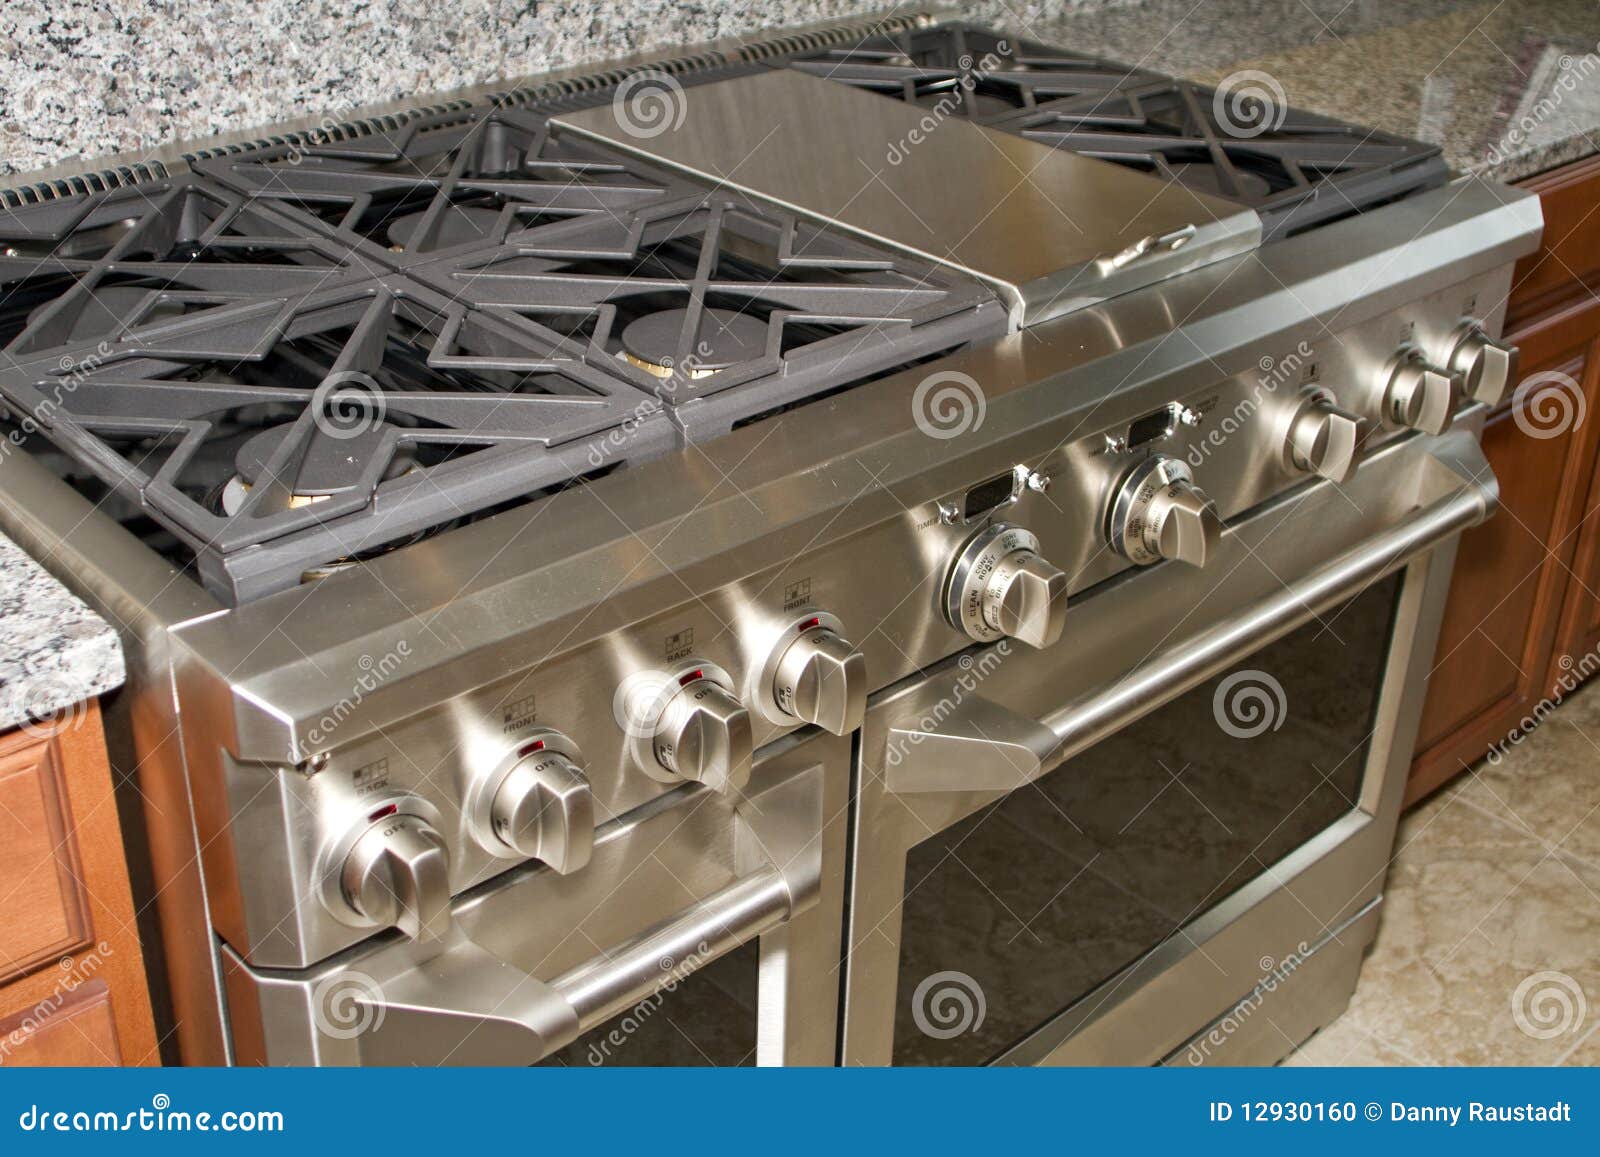 https://thumbs.dreamstime.com/z/stainless-steel-home-gas-range-stove-oven-12930160.jpg